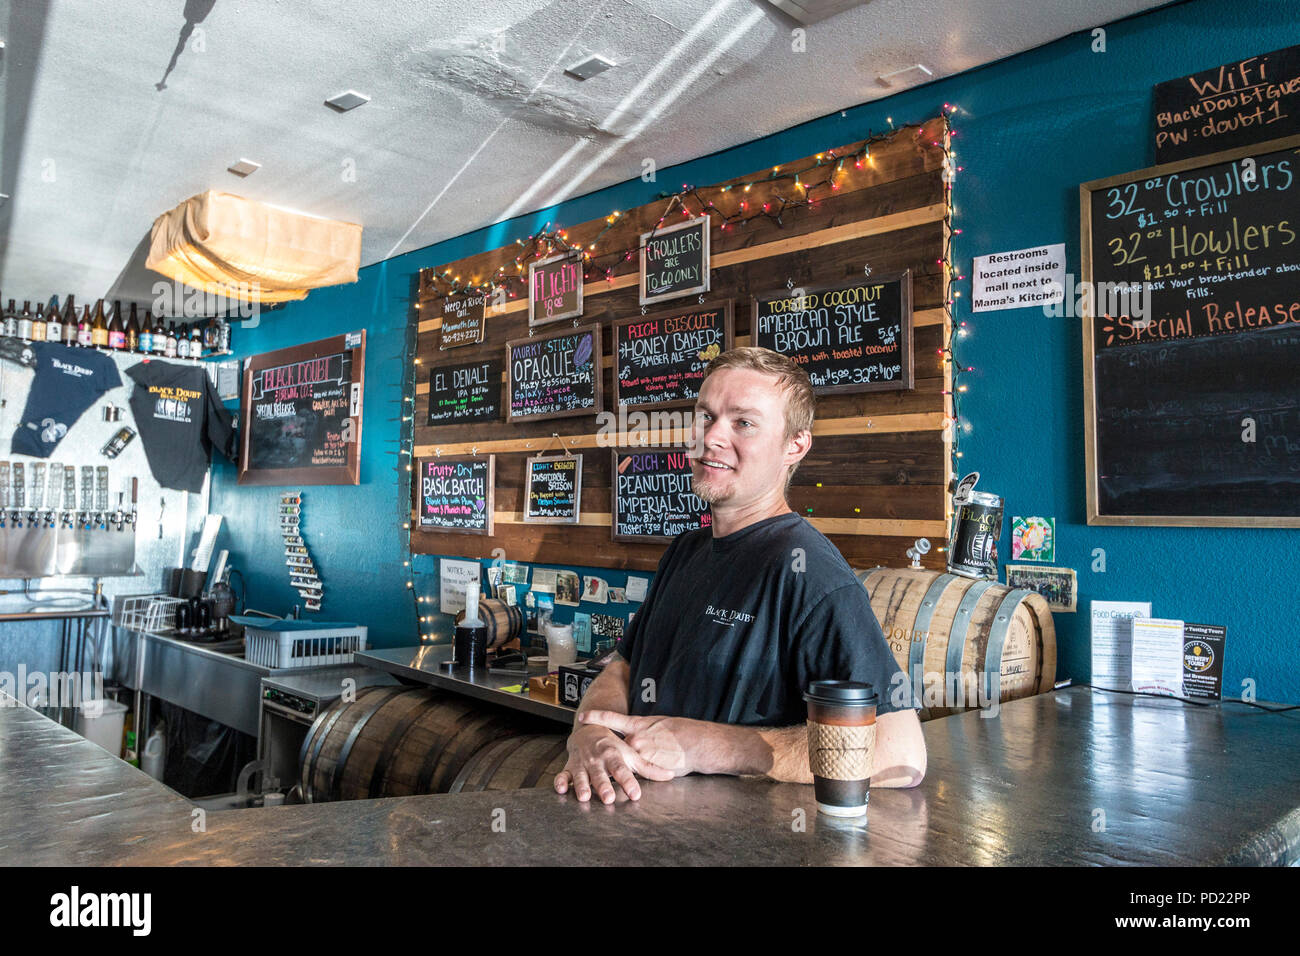 Owner Drew Wallace in Black Doubt, a nano-brewery in Mammoth Lakes with a wide range of specialty beers inclluding some truly unique ones including 'Peanut Butter Imperial Stout.' Stock Photo